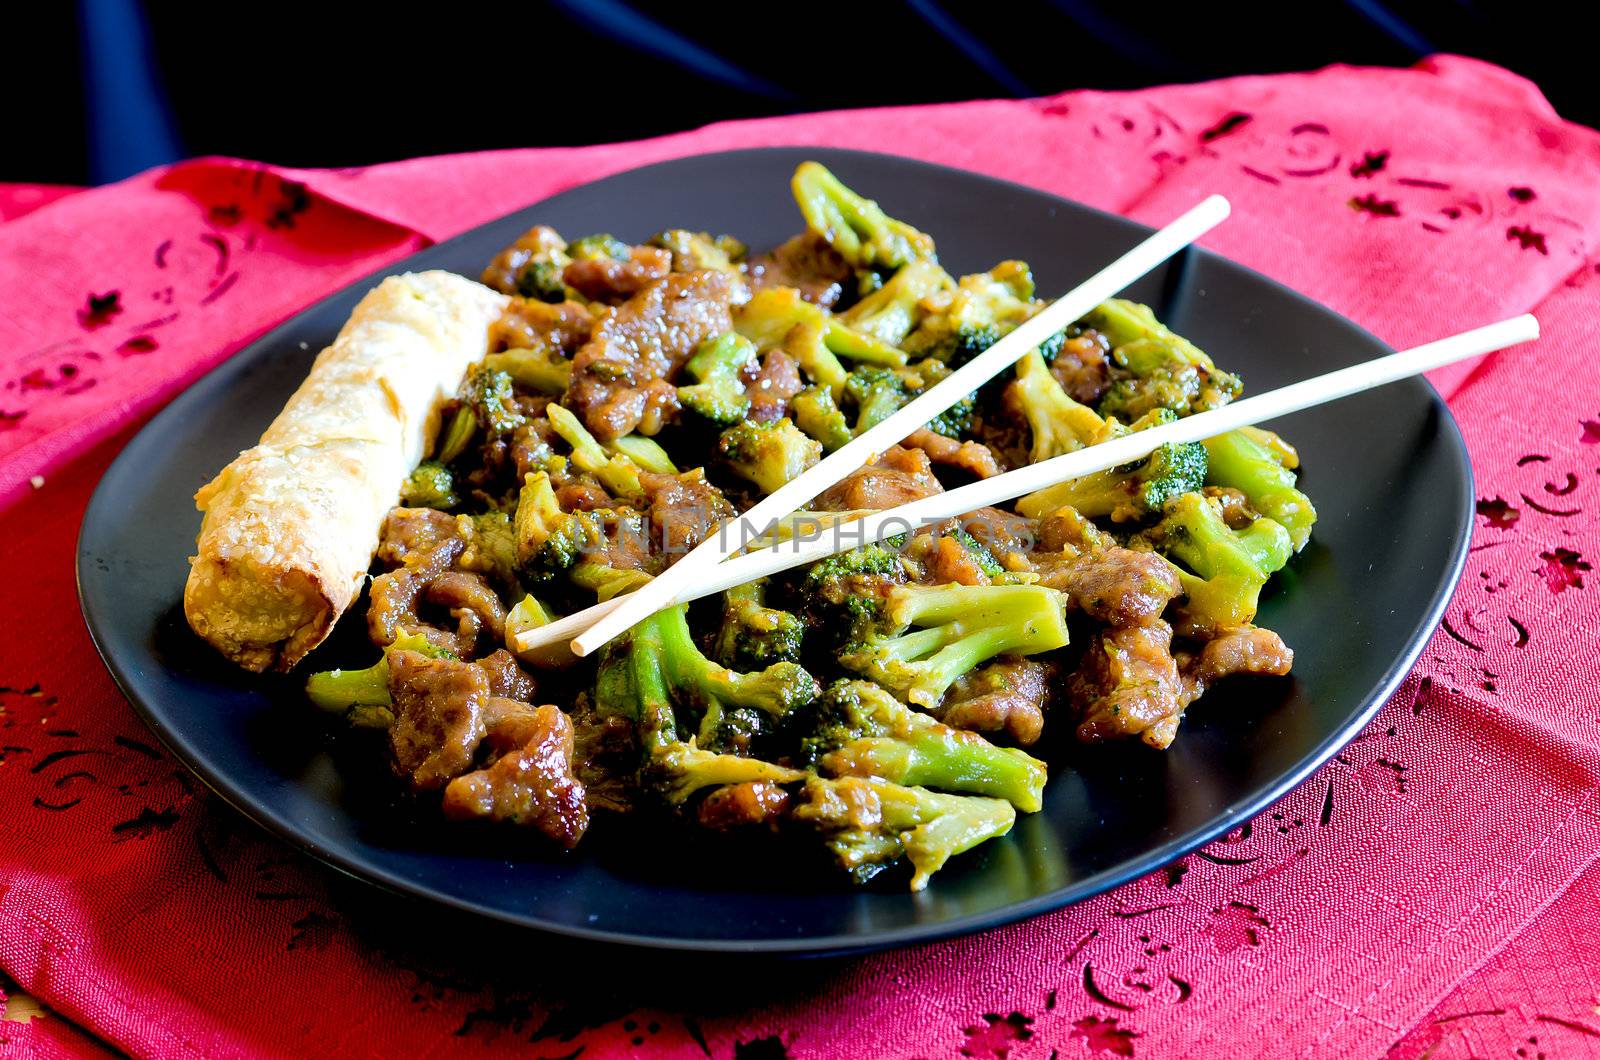 Beef with broccoli with spring roll and chop sticks.